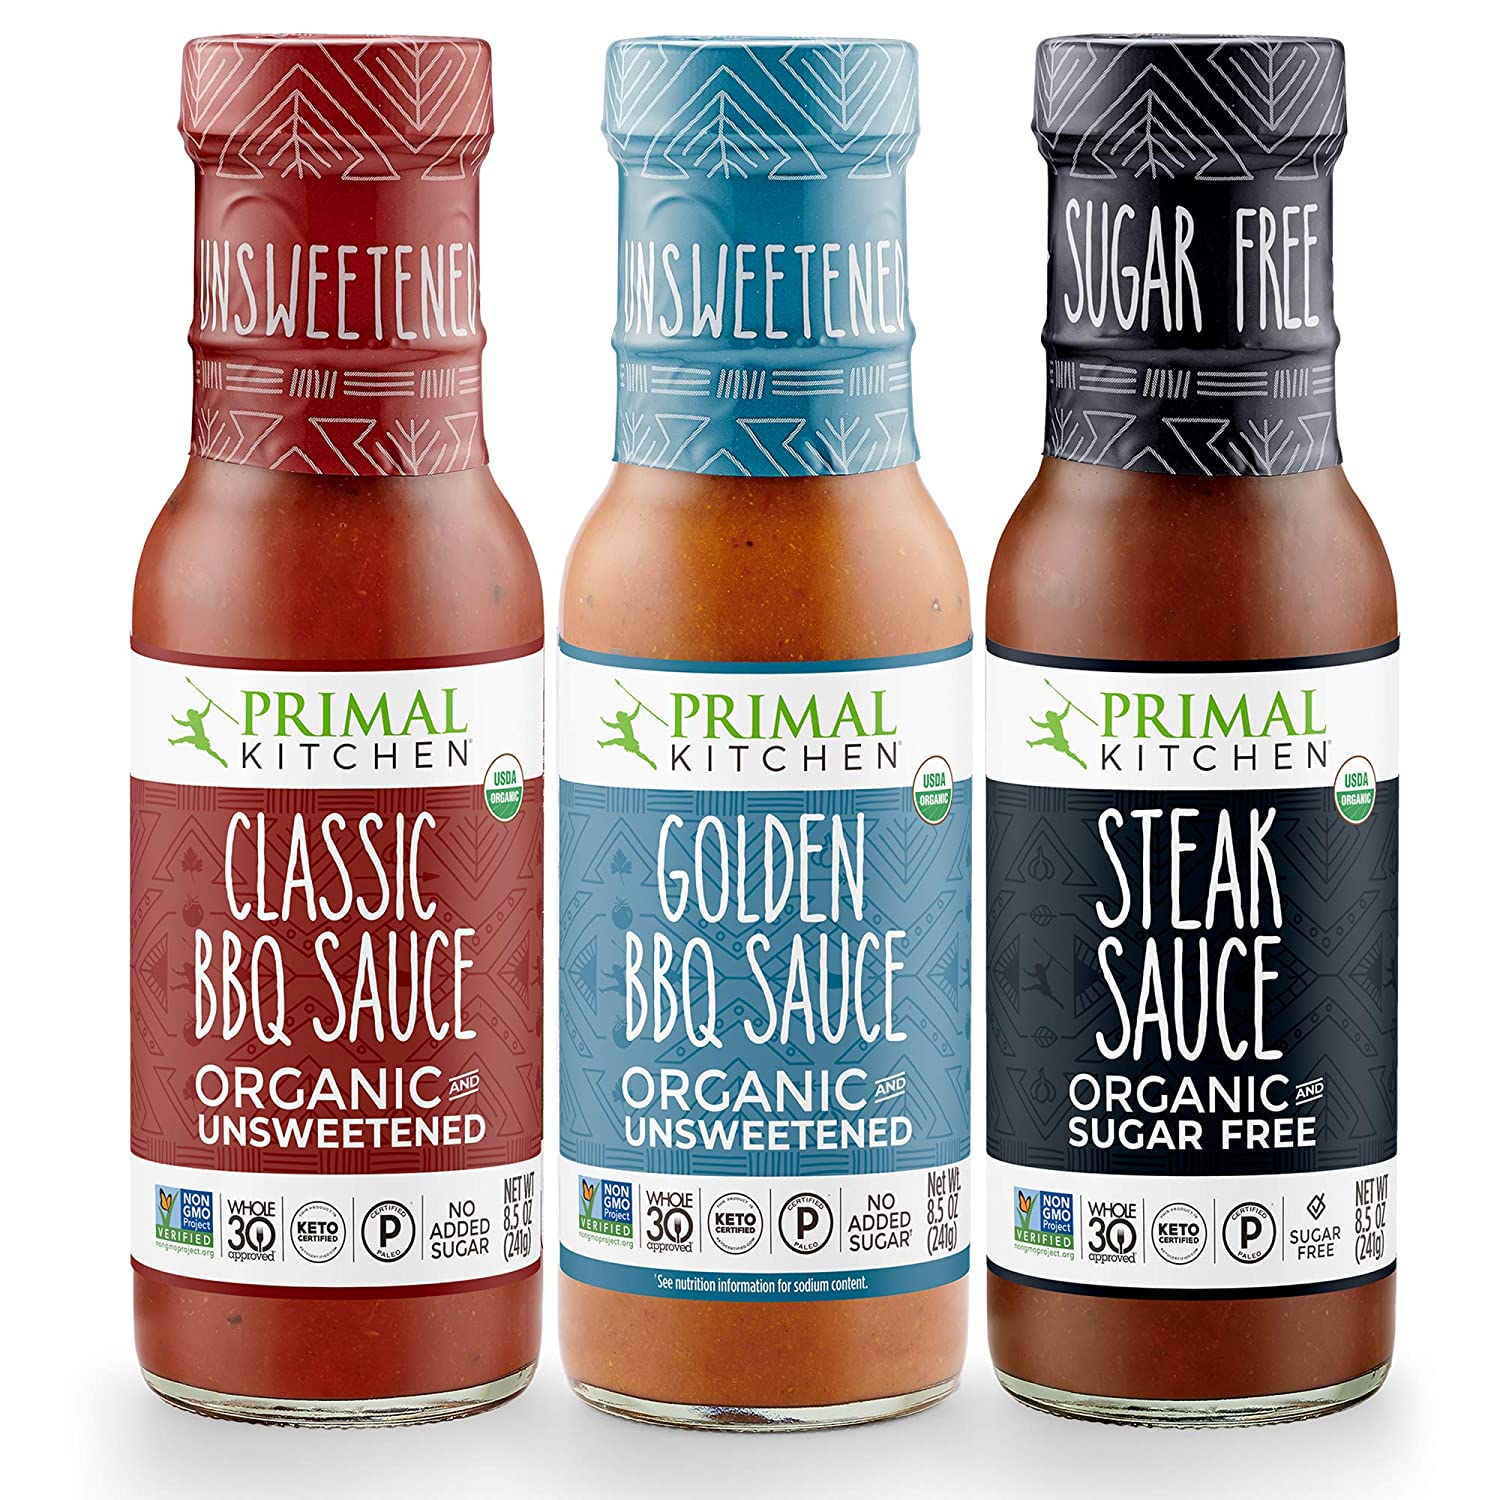 3 Pack Organic and Unsweetned Barbeque & Steak Sauce - Whole 30 Approved, Keto, Paleo Friendly - Includes: Classic BBQ, Golden BBQ, and Steak Sauce - image 1 of 2